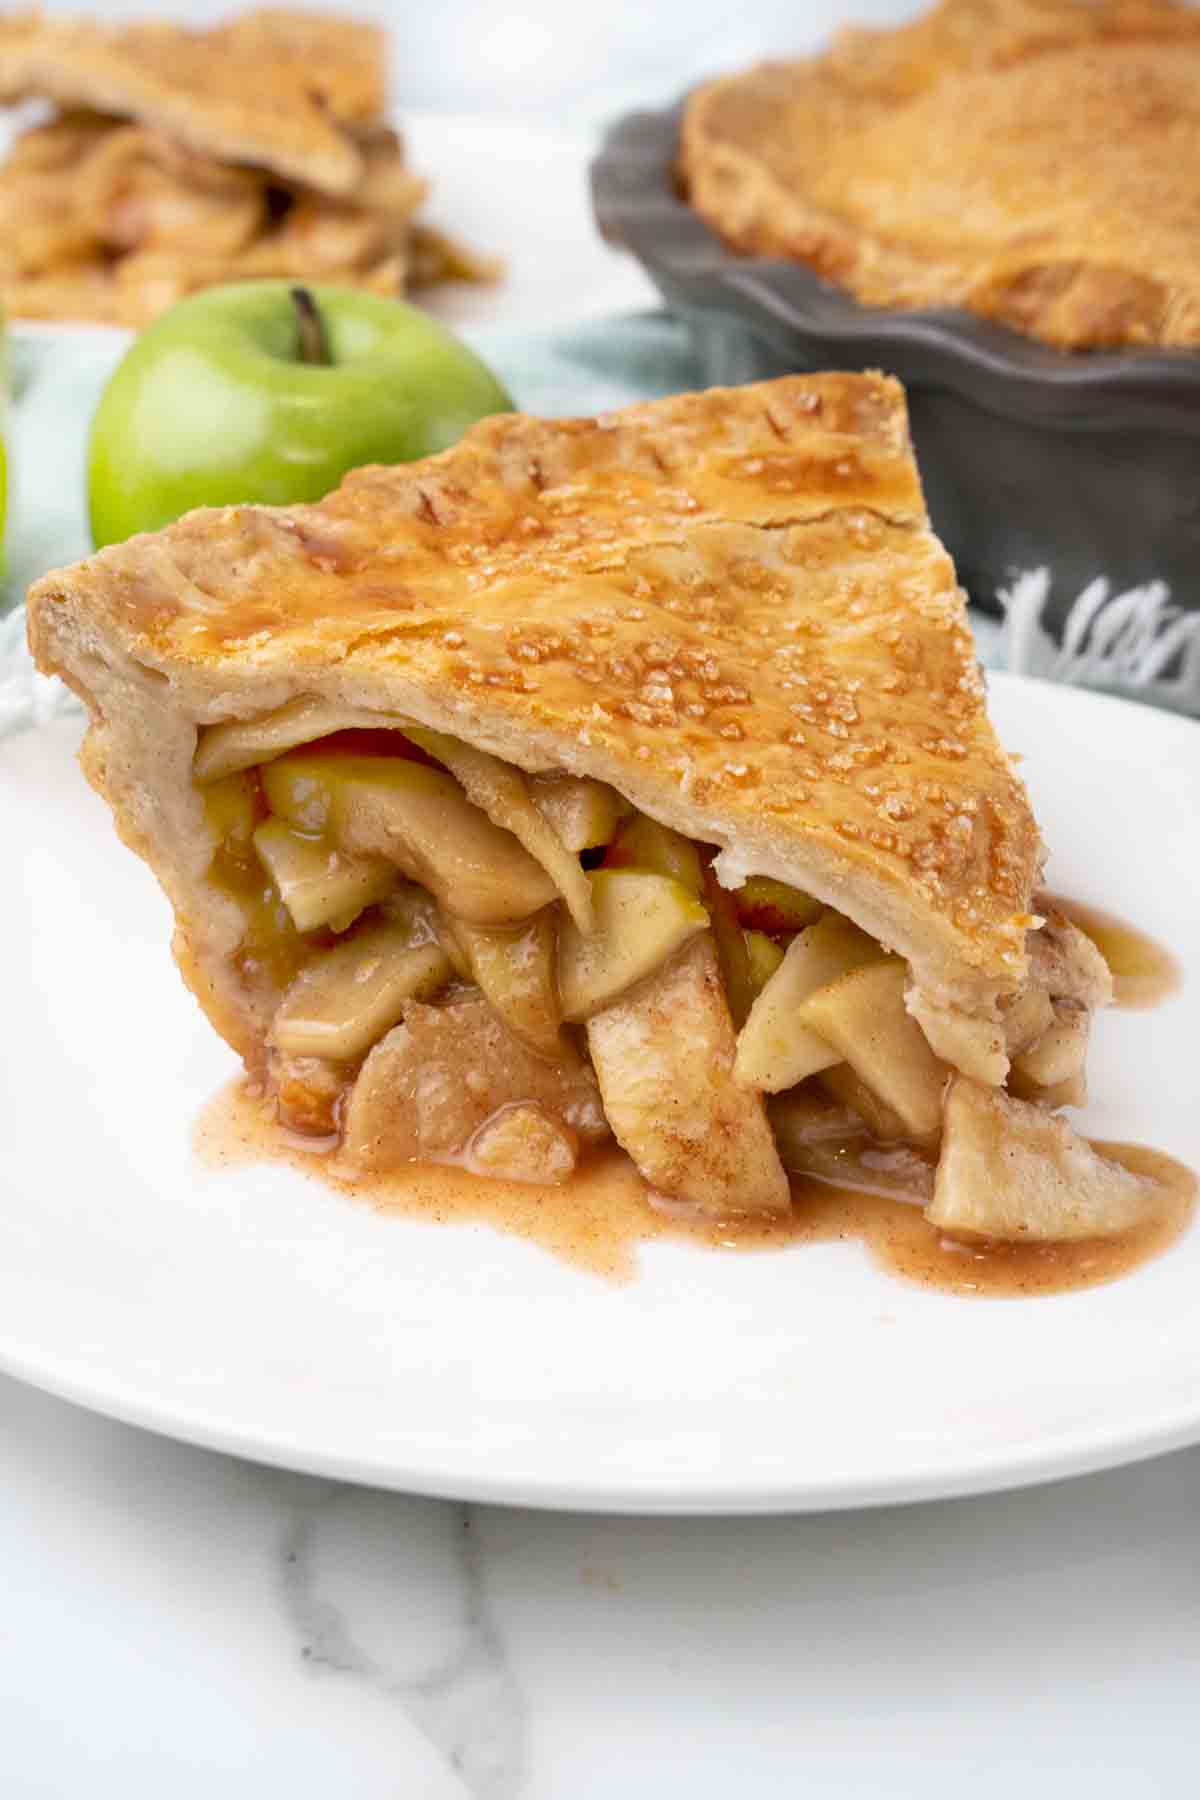 Slice of apple pie on a white plate.